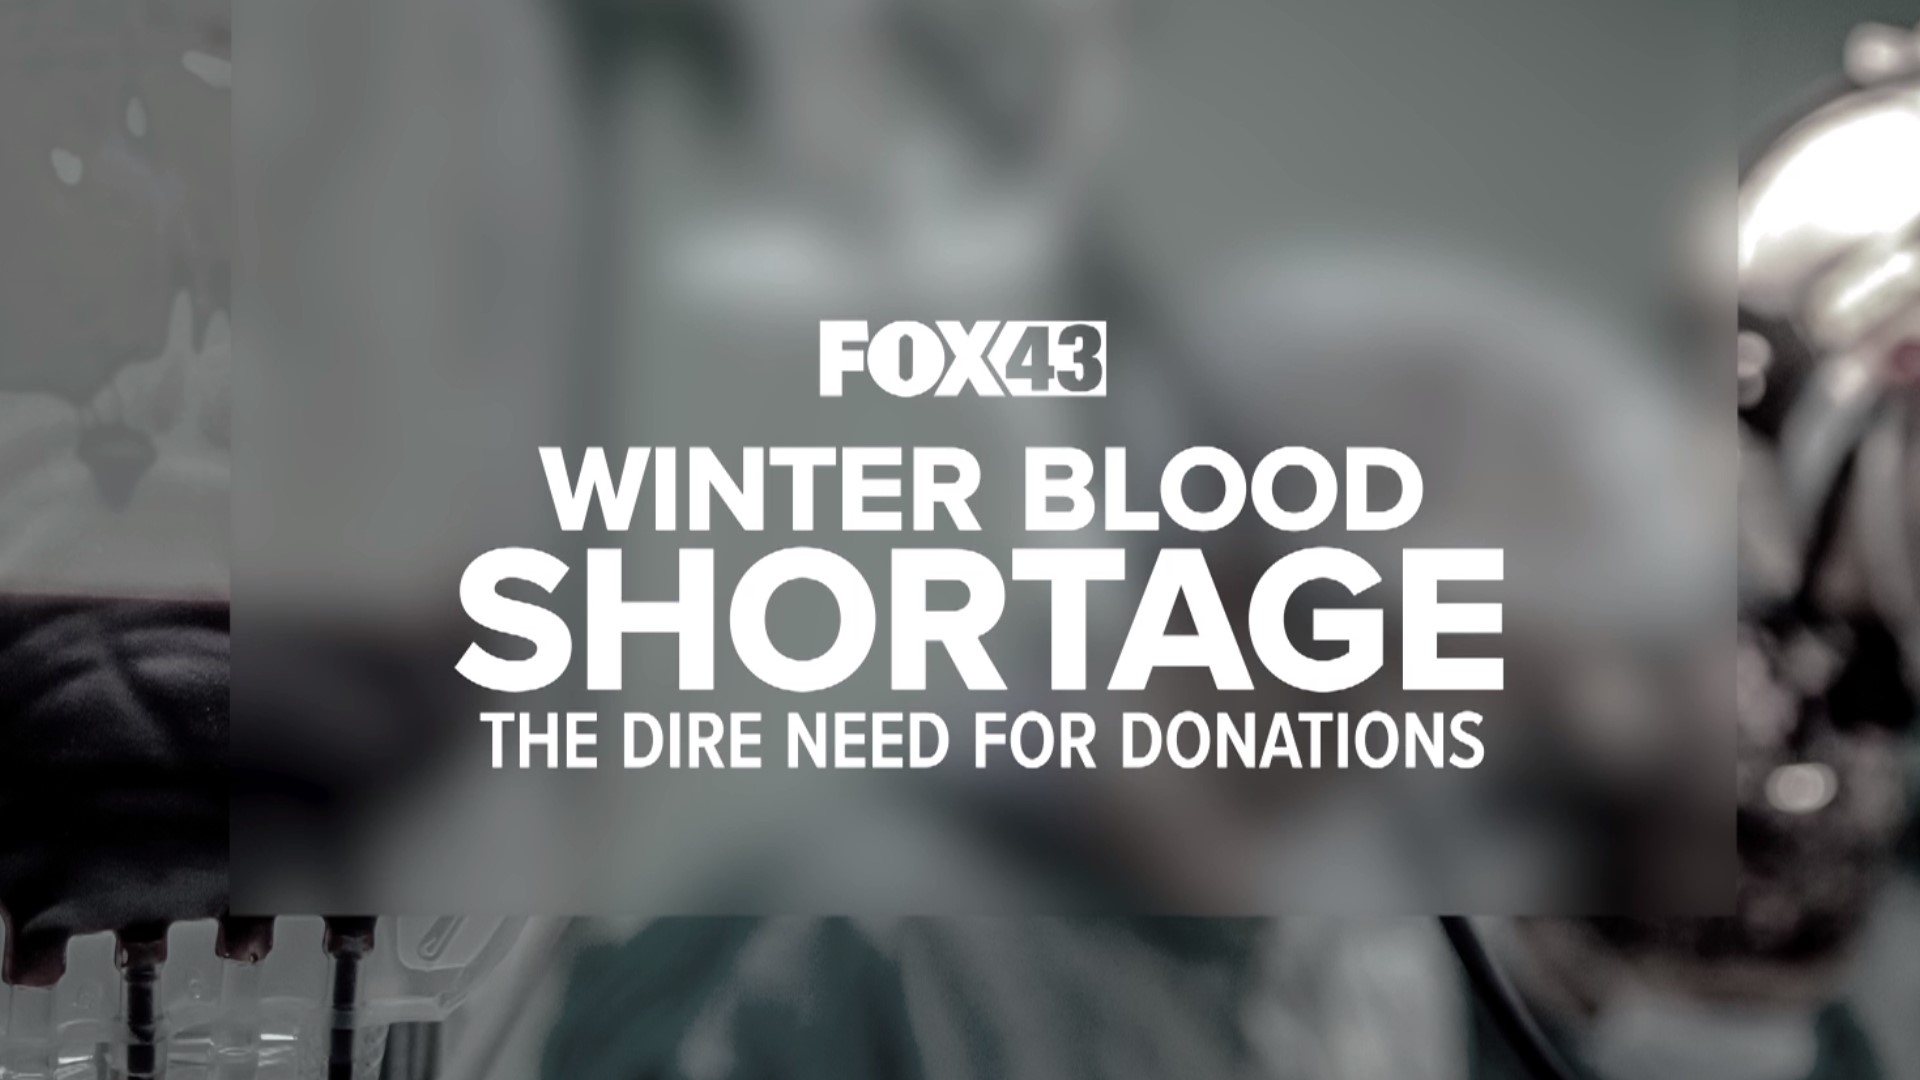 FOX43 dove into the shortage of blood, and why the need for donations is greater than ever.